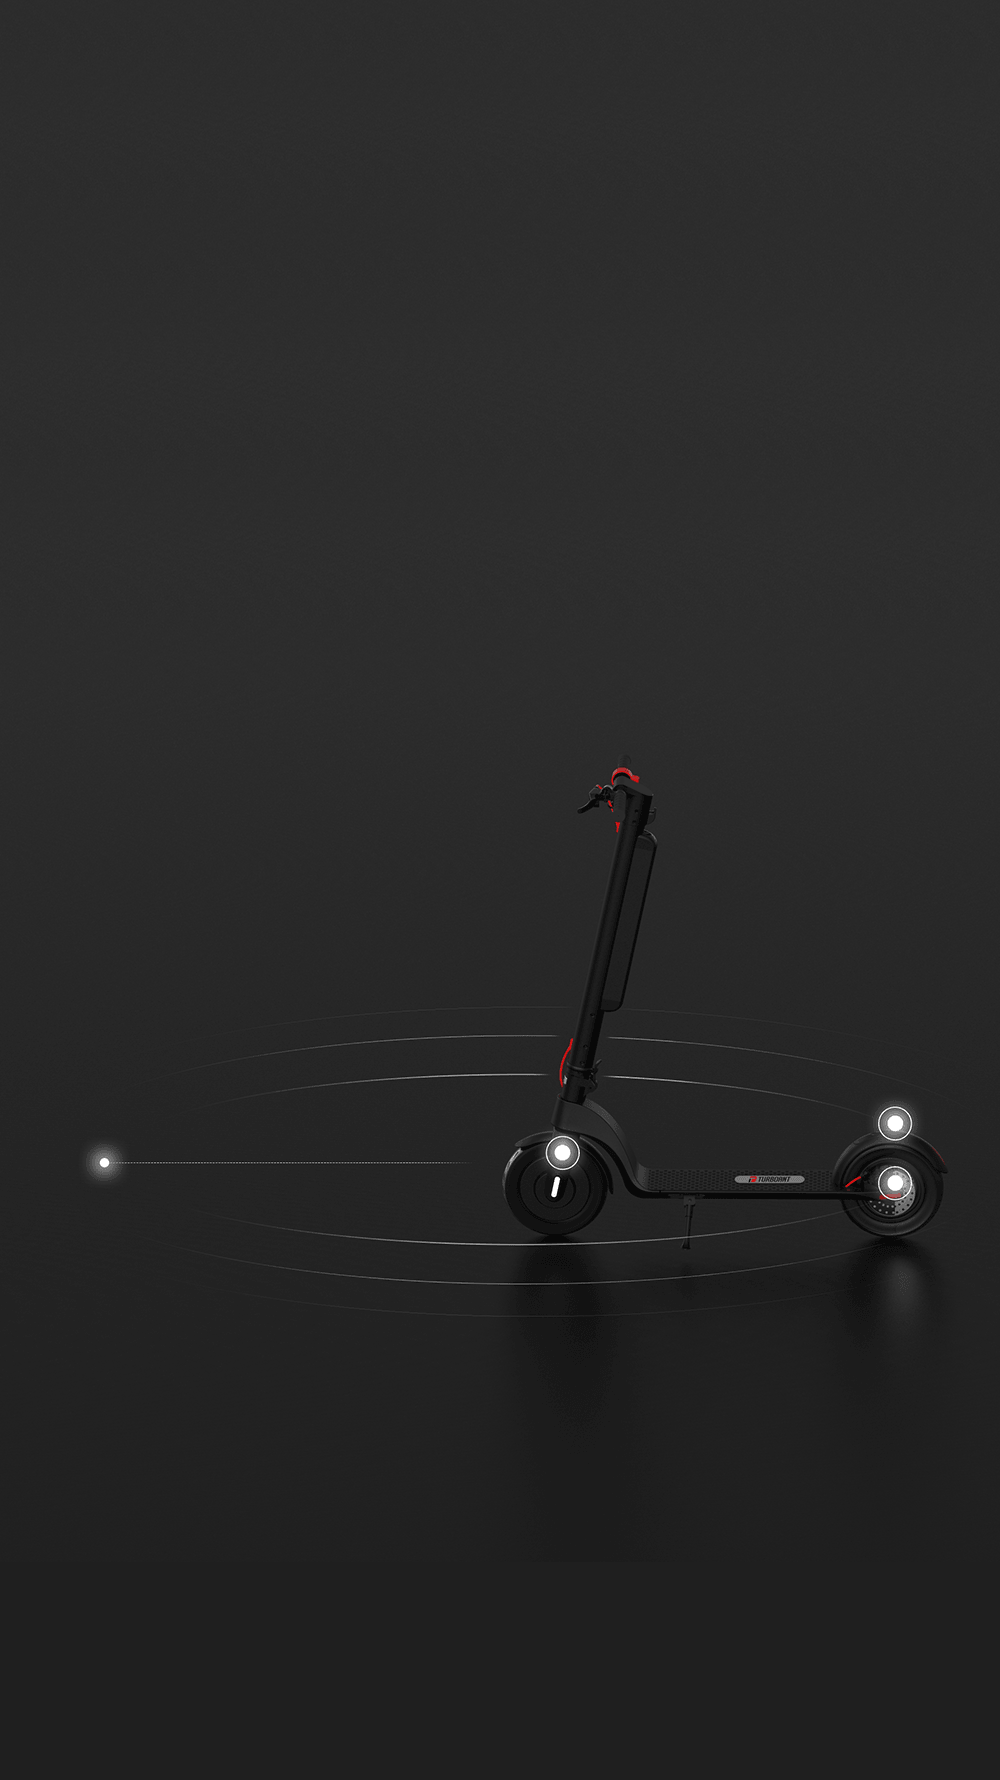 TurboAnt X7 Pro folding electric scooter for adults , easily assemble and fold